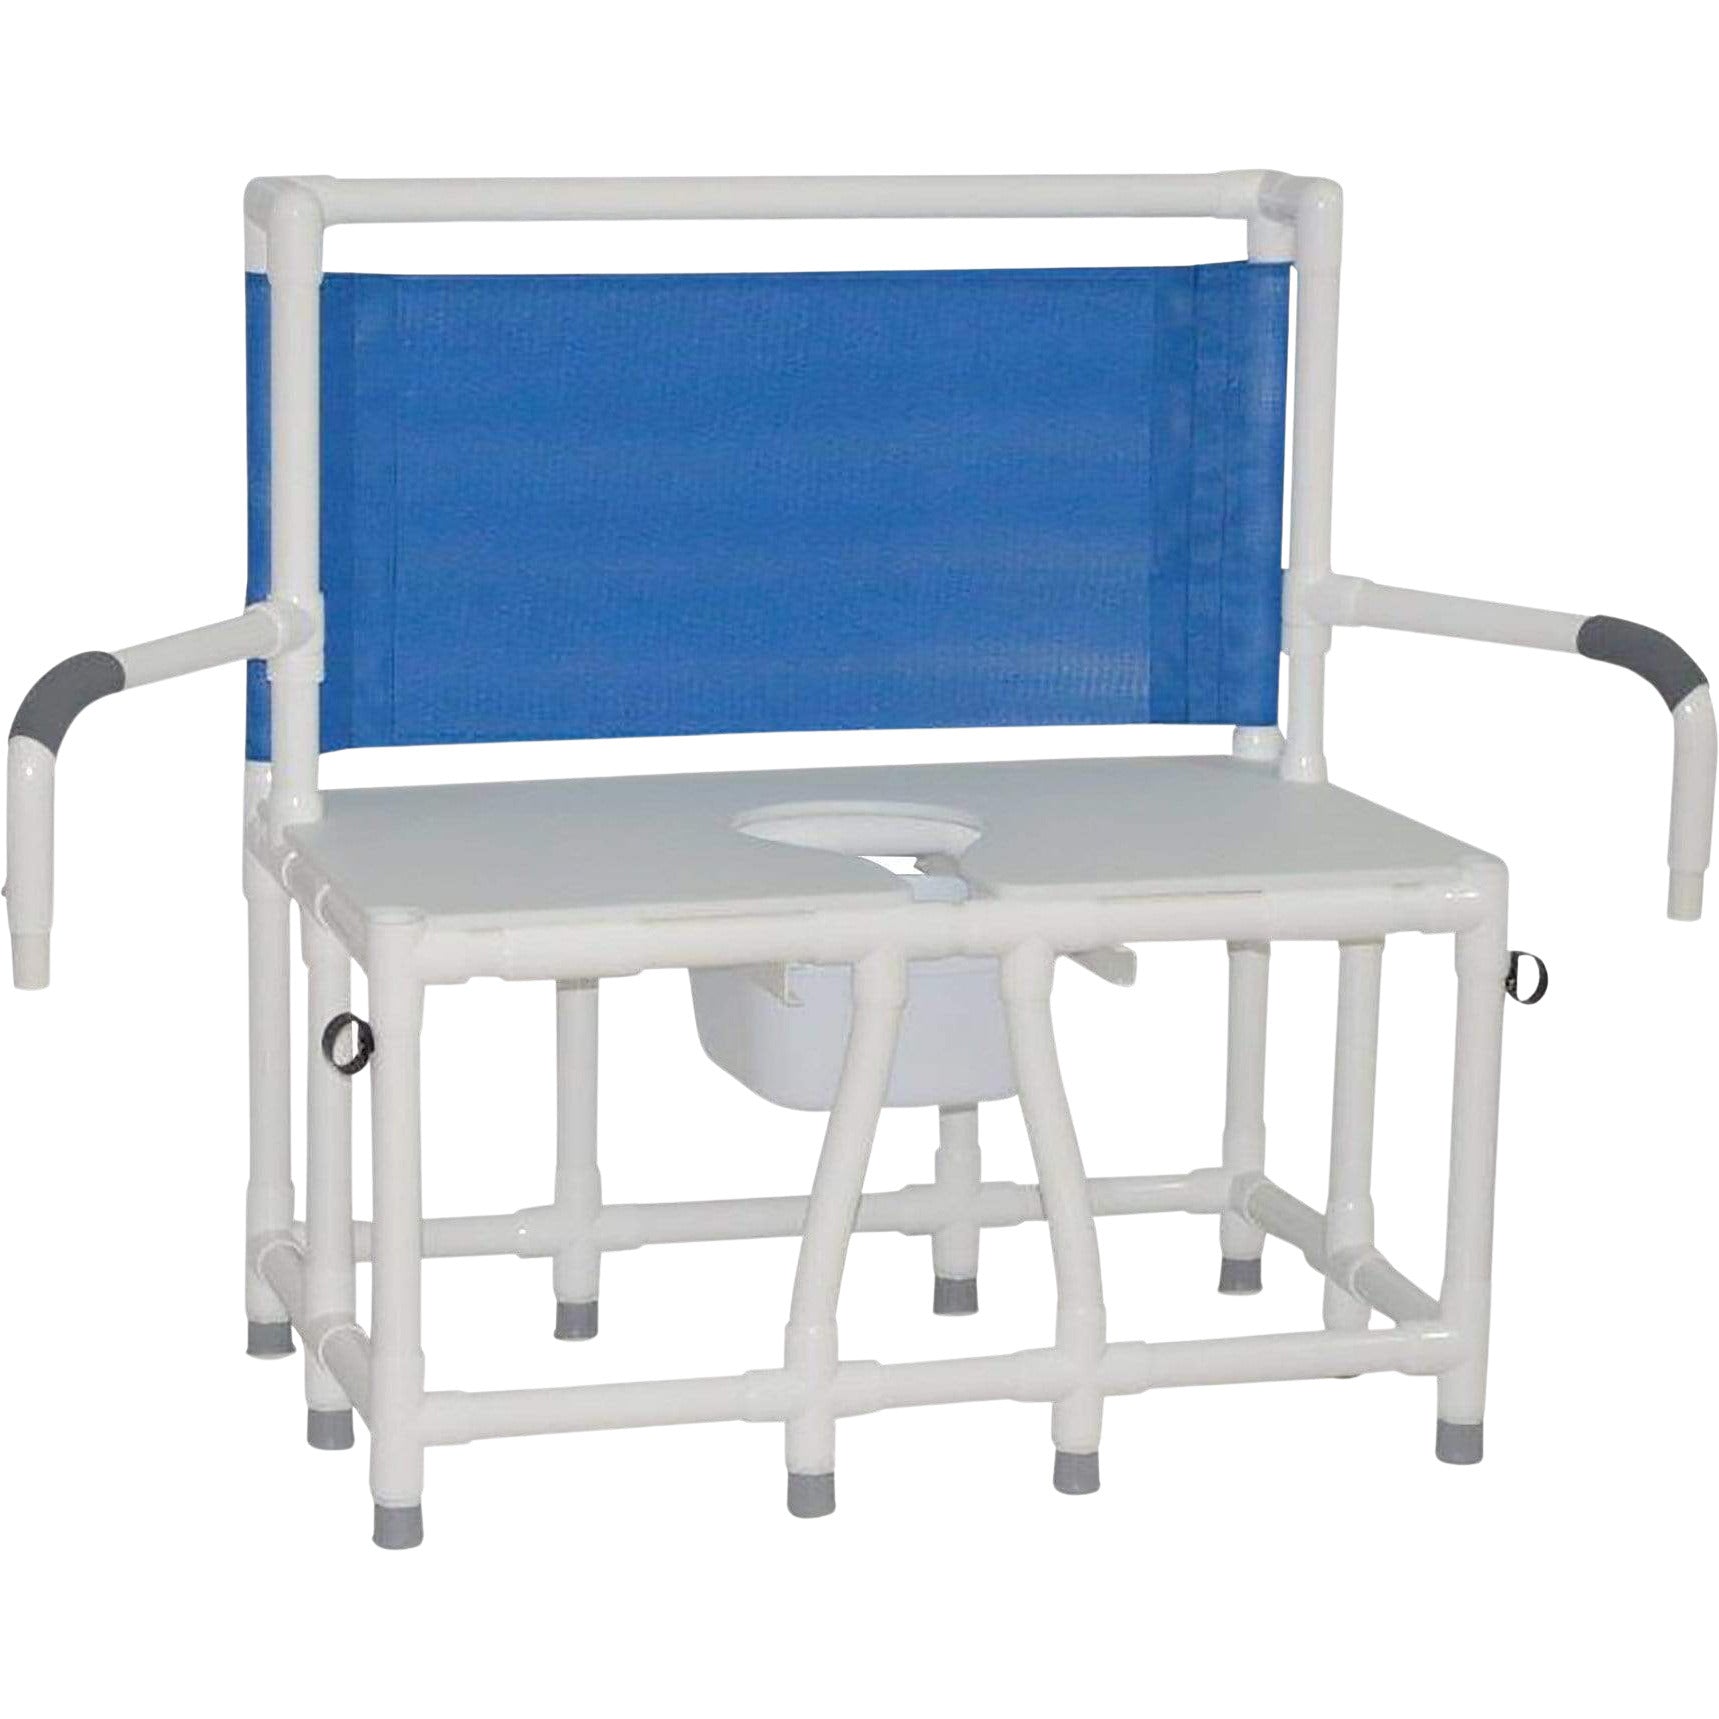 ConvaQuip Bedside Commodes - PVC Model 136-C10-DDA Bariatric Bedside Commode - Swing Away Arms